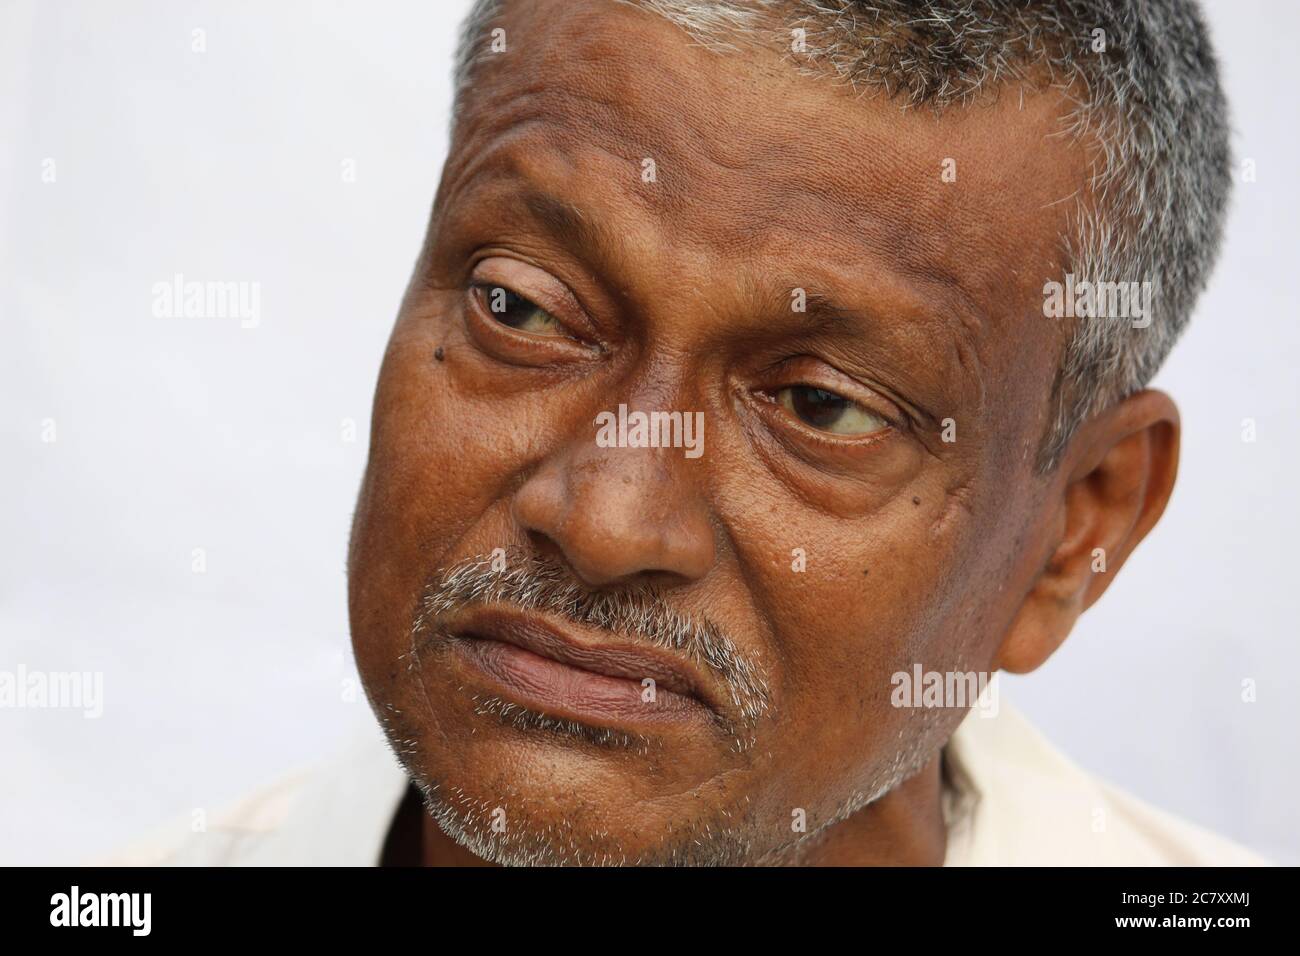 Sad or thoughtful senior Indian man face portrait on white background. Old man looking side way. Stock Photo